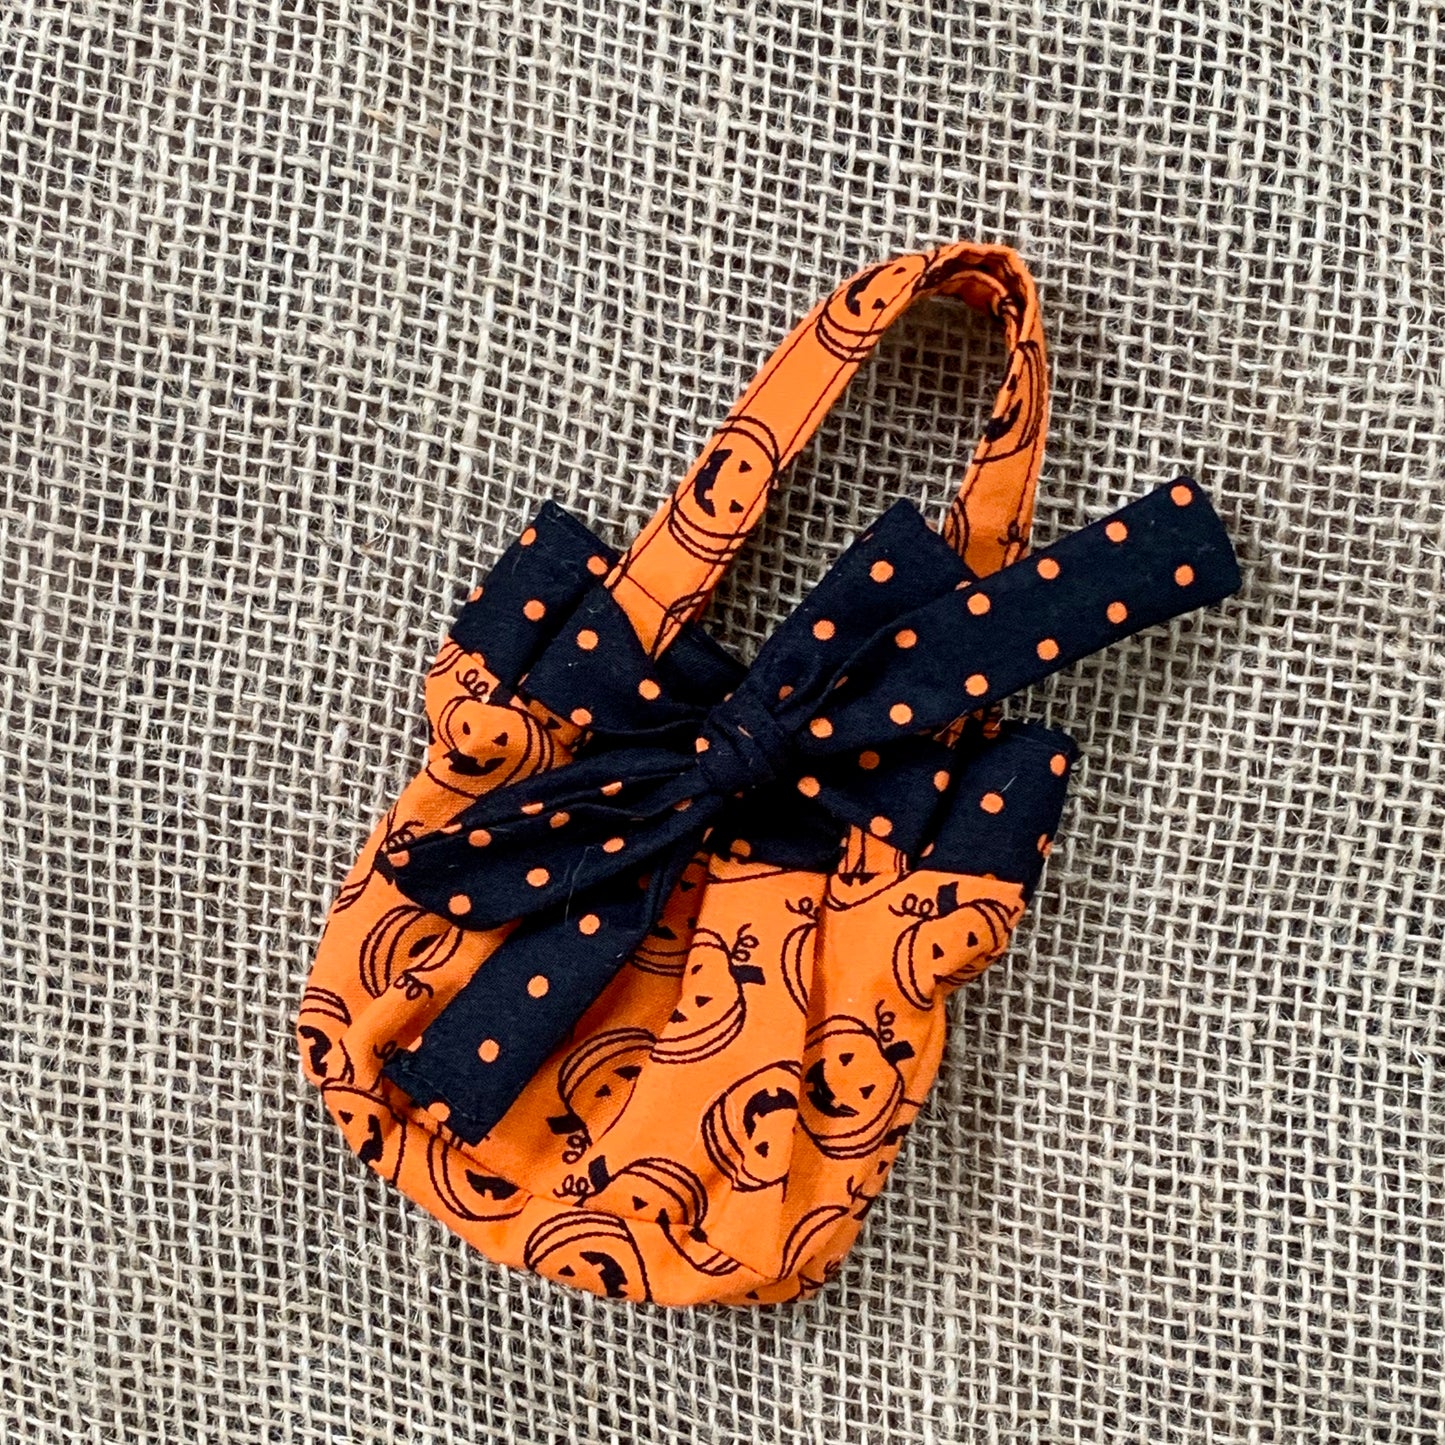 Enchanted Trick-or-Treat Bag (other colors available)